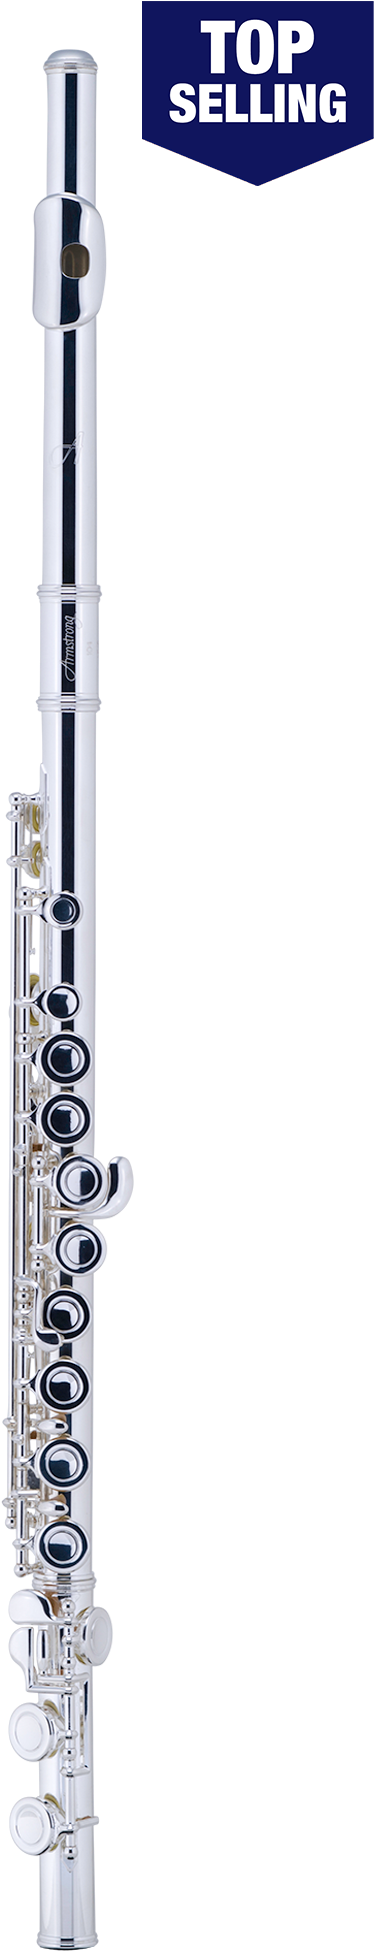 A Flute With Black Background